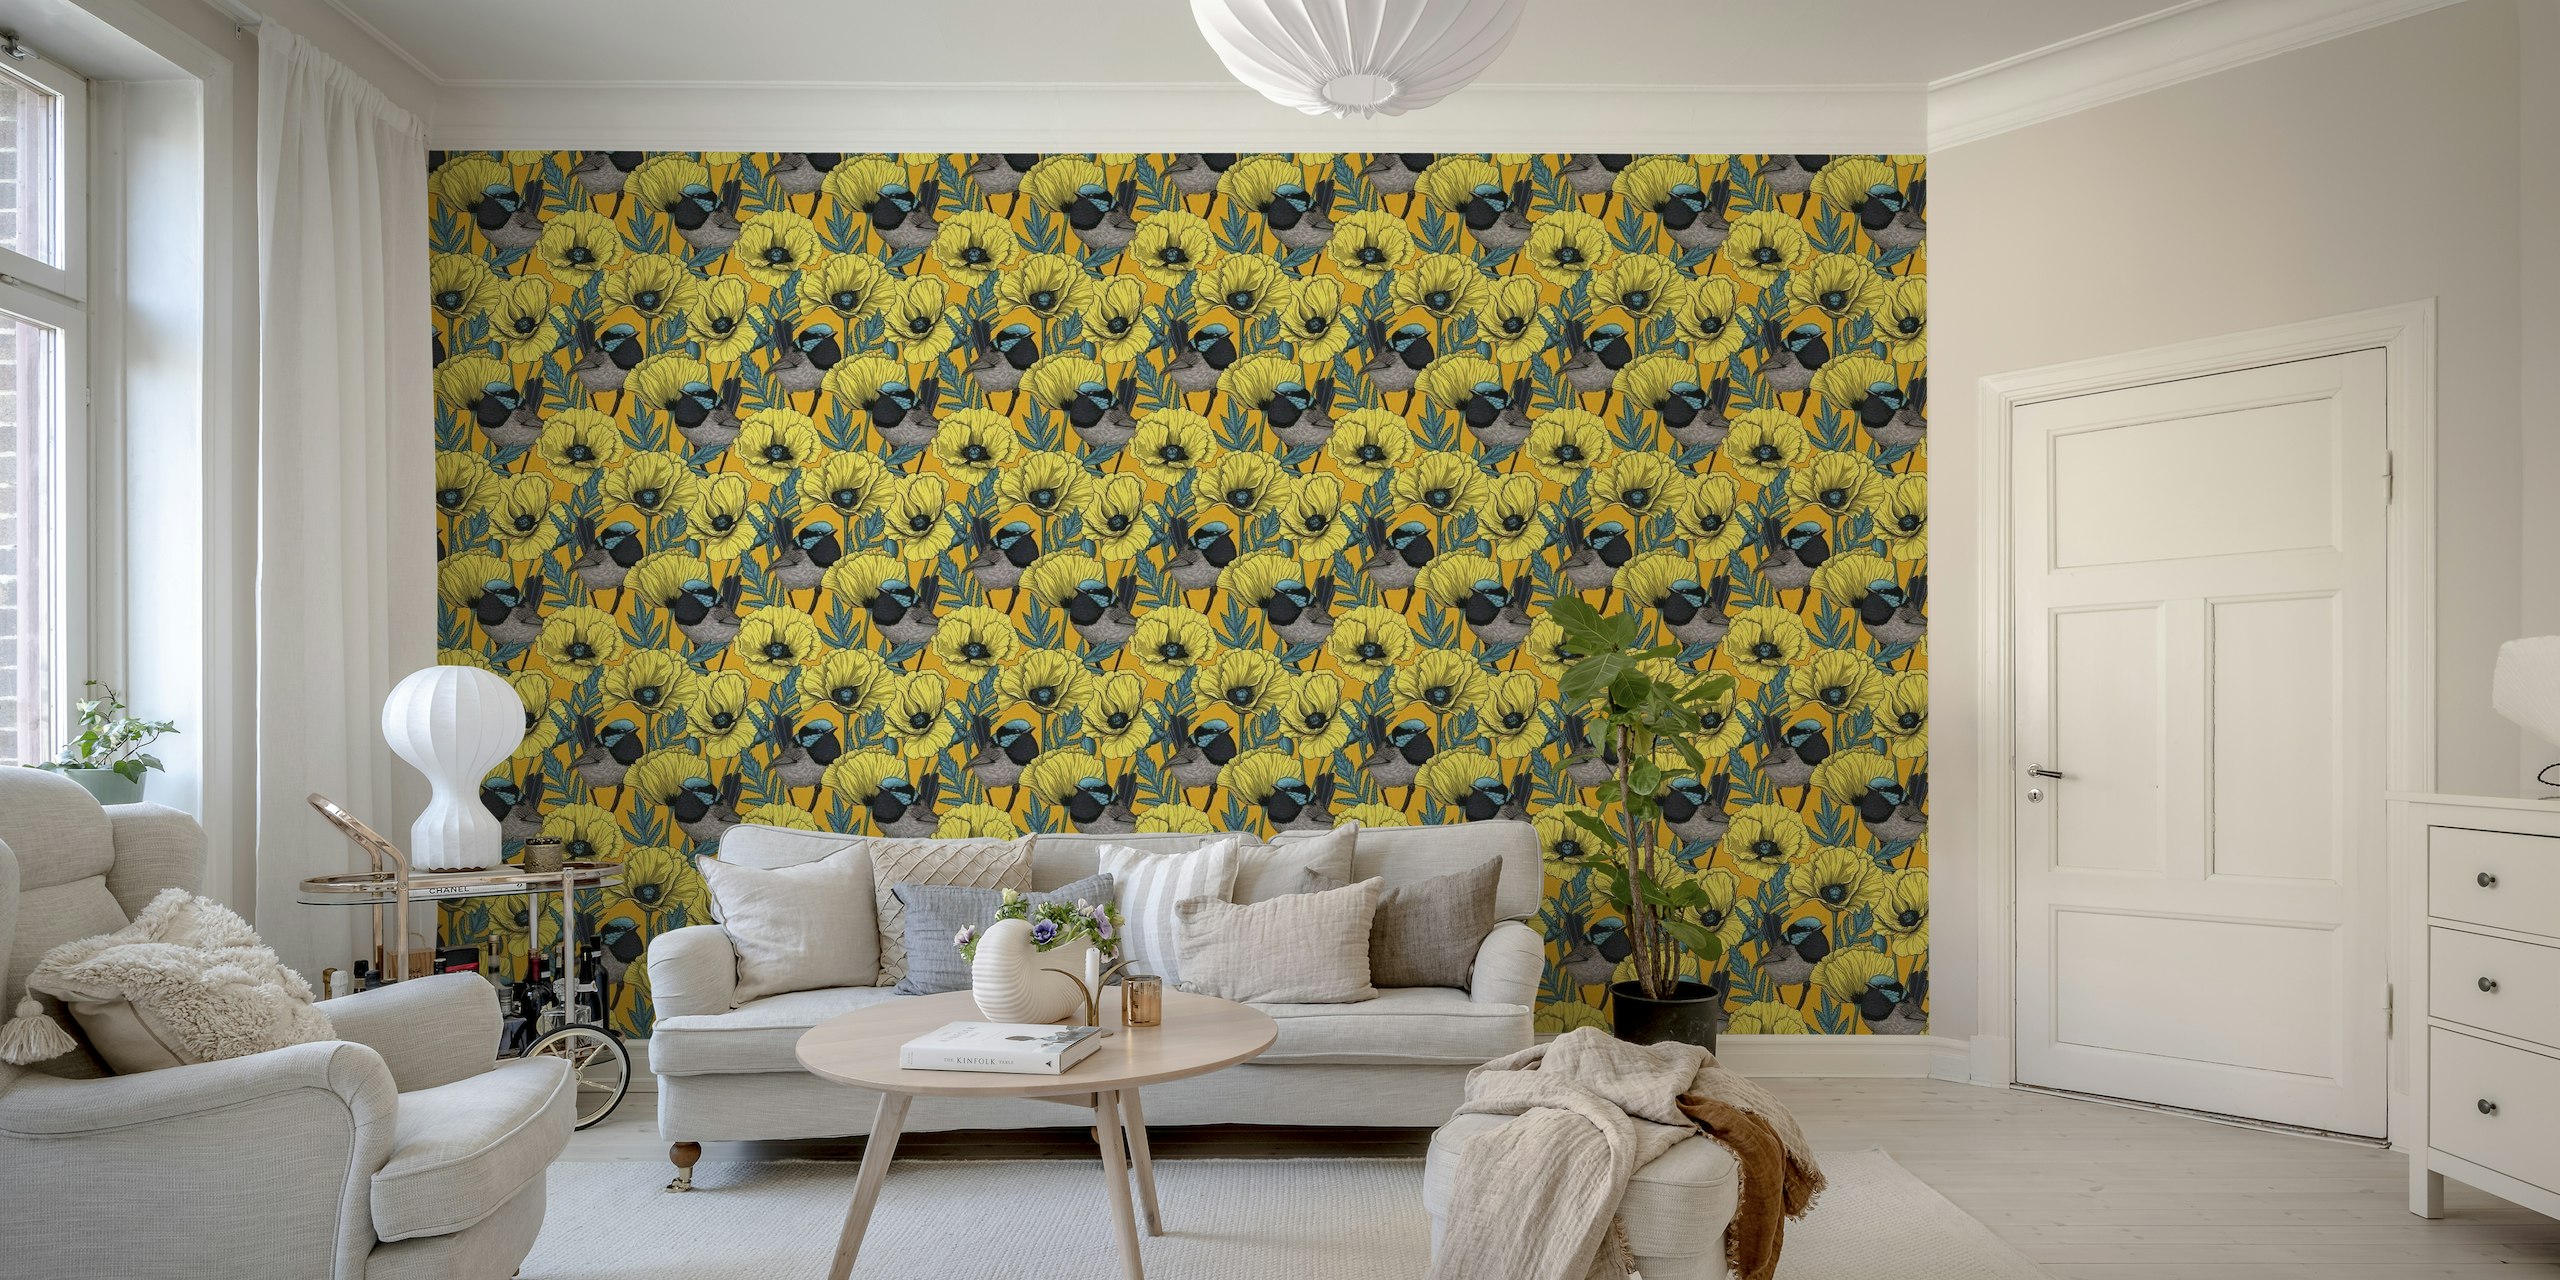 Fairy wrens and yellow poppies on orange wallpaper